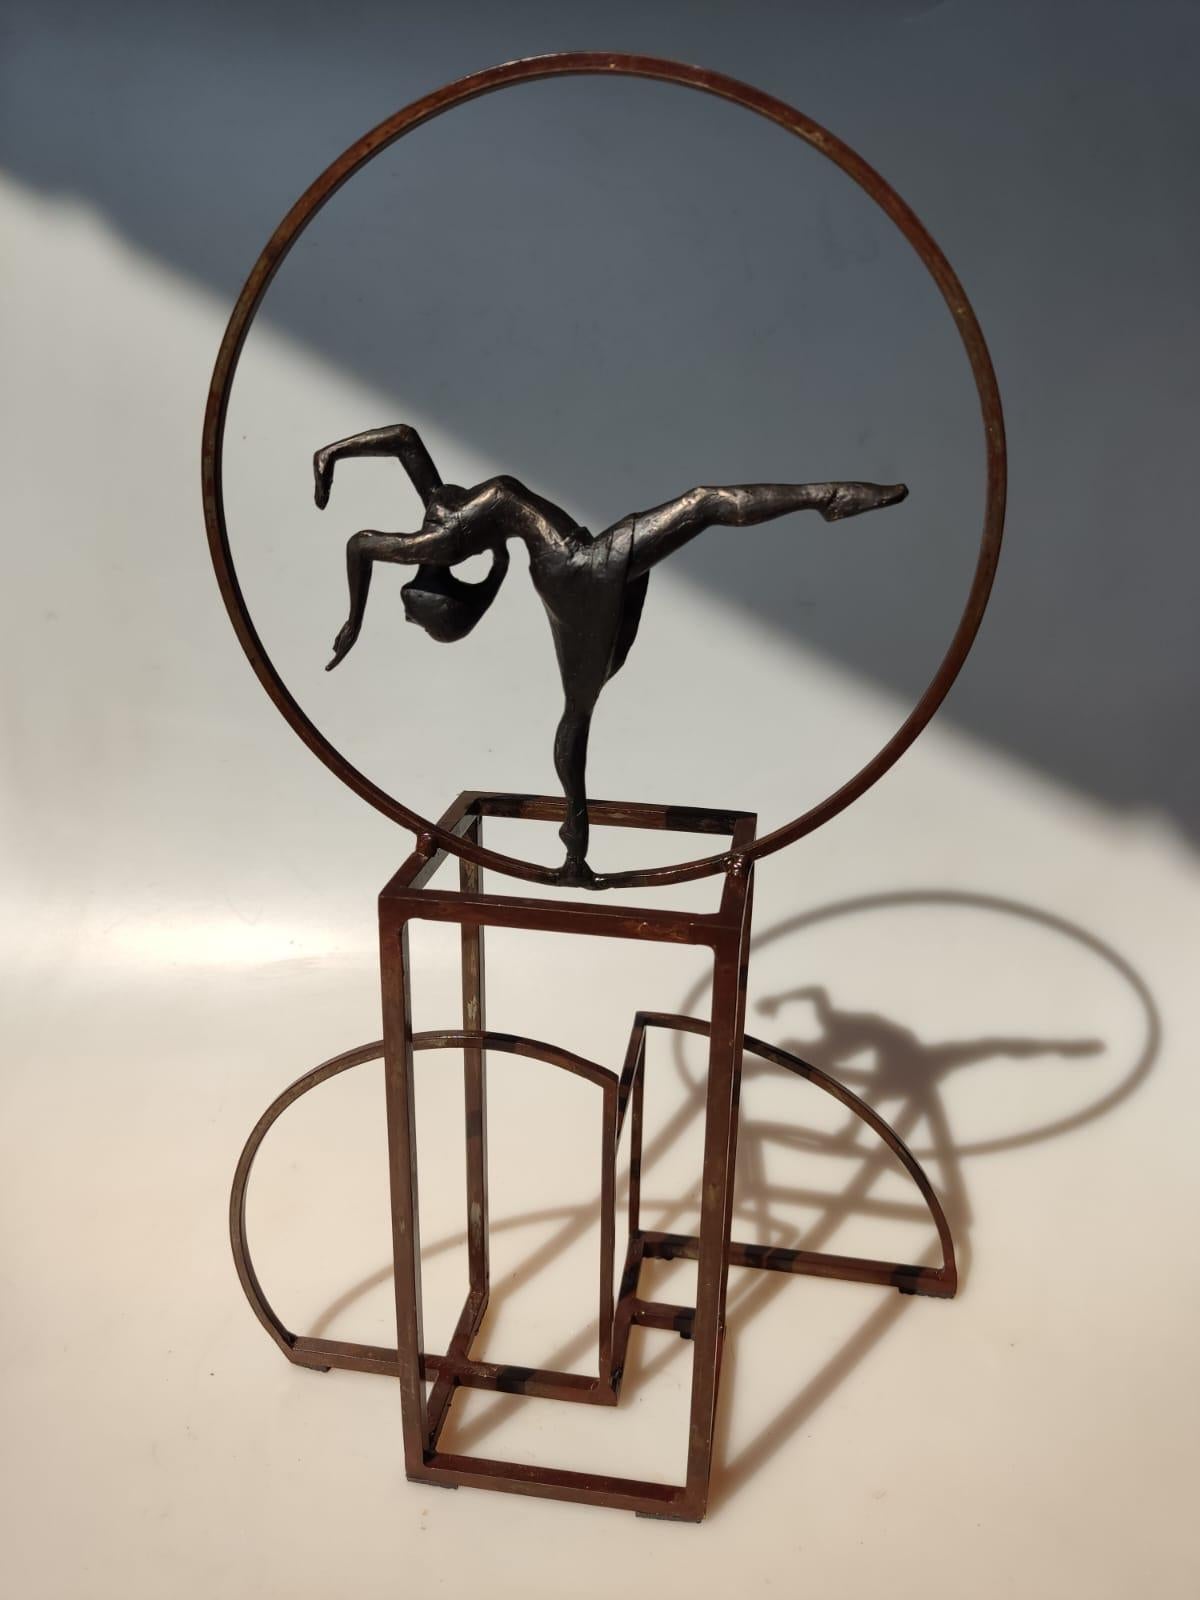 Isadora II is a bronze sculpture with black patina, it is connected to a steel base. The edition size is 25. This sculpture stands on shelf as well as be hung on wall. Joan pays tribute to ballerina Isadora Duncan.

Joan’s latest sculpture series of